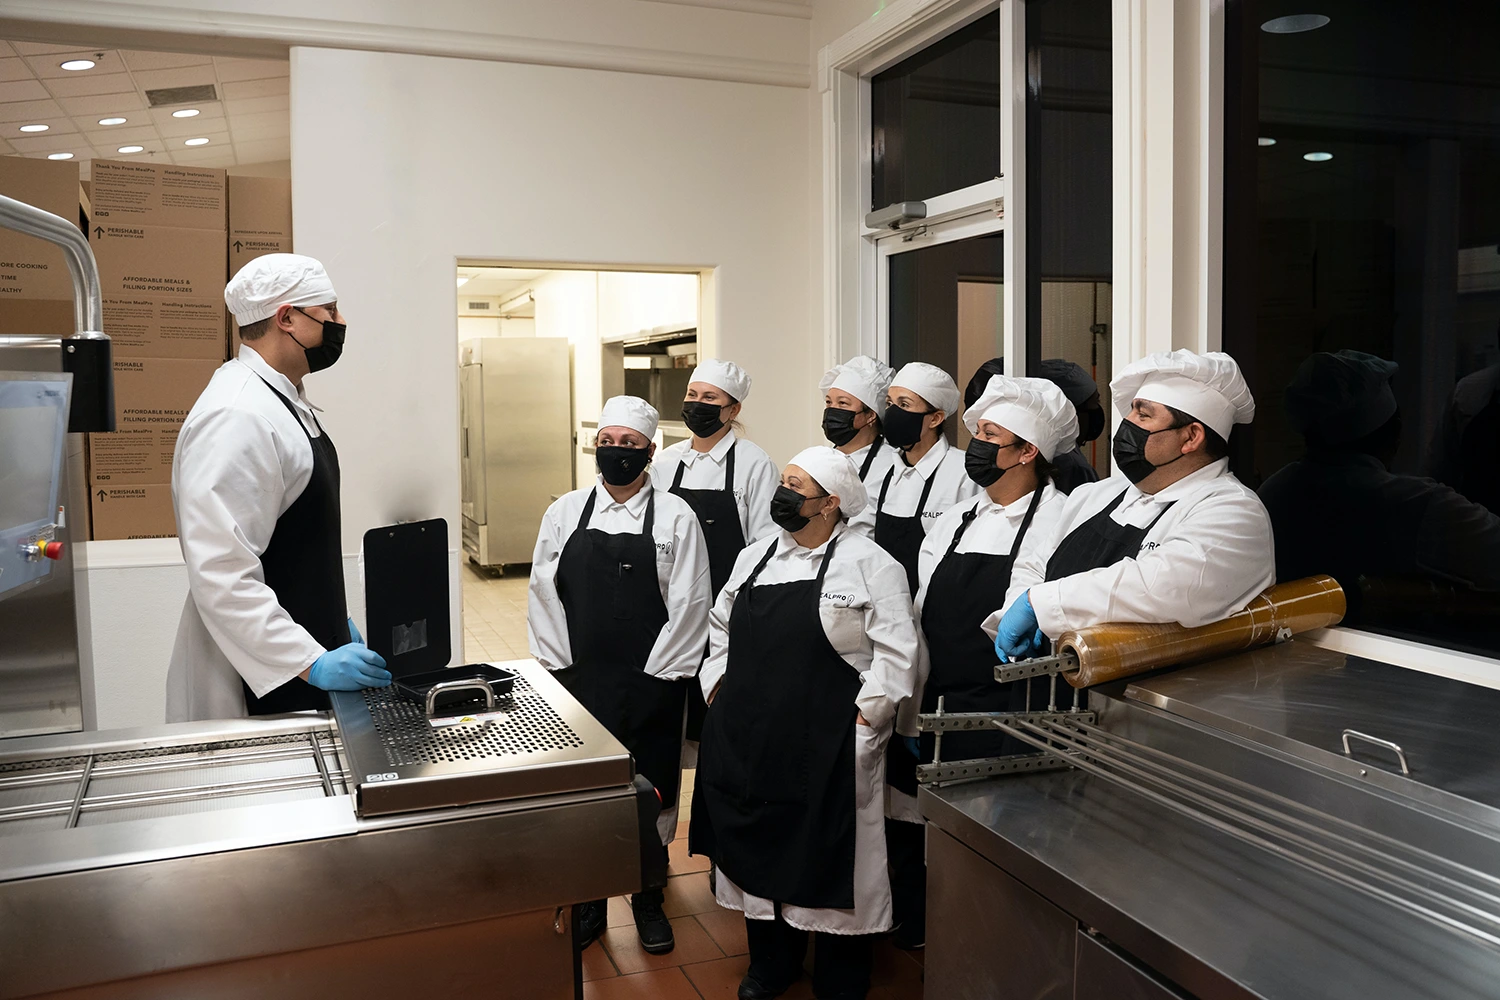 A group of chefs standing in a kitchen preparing the holiday menu for restaurants.